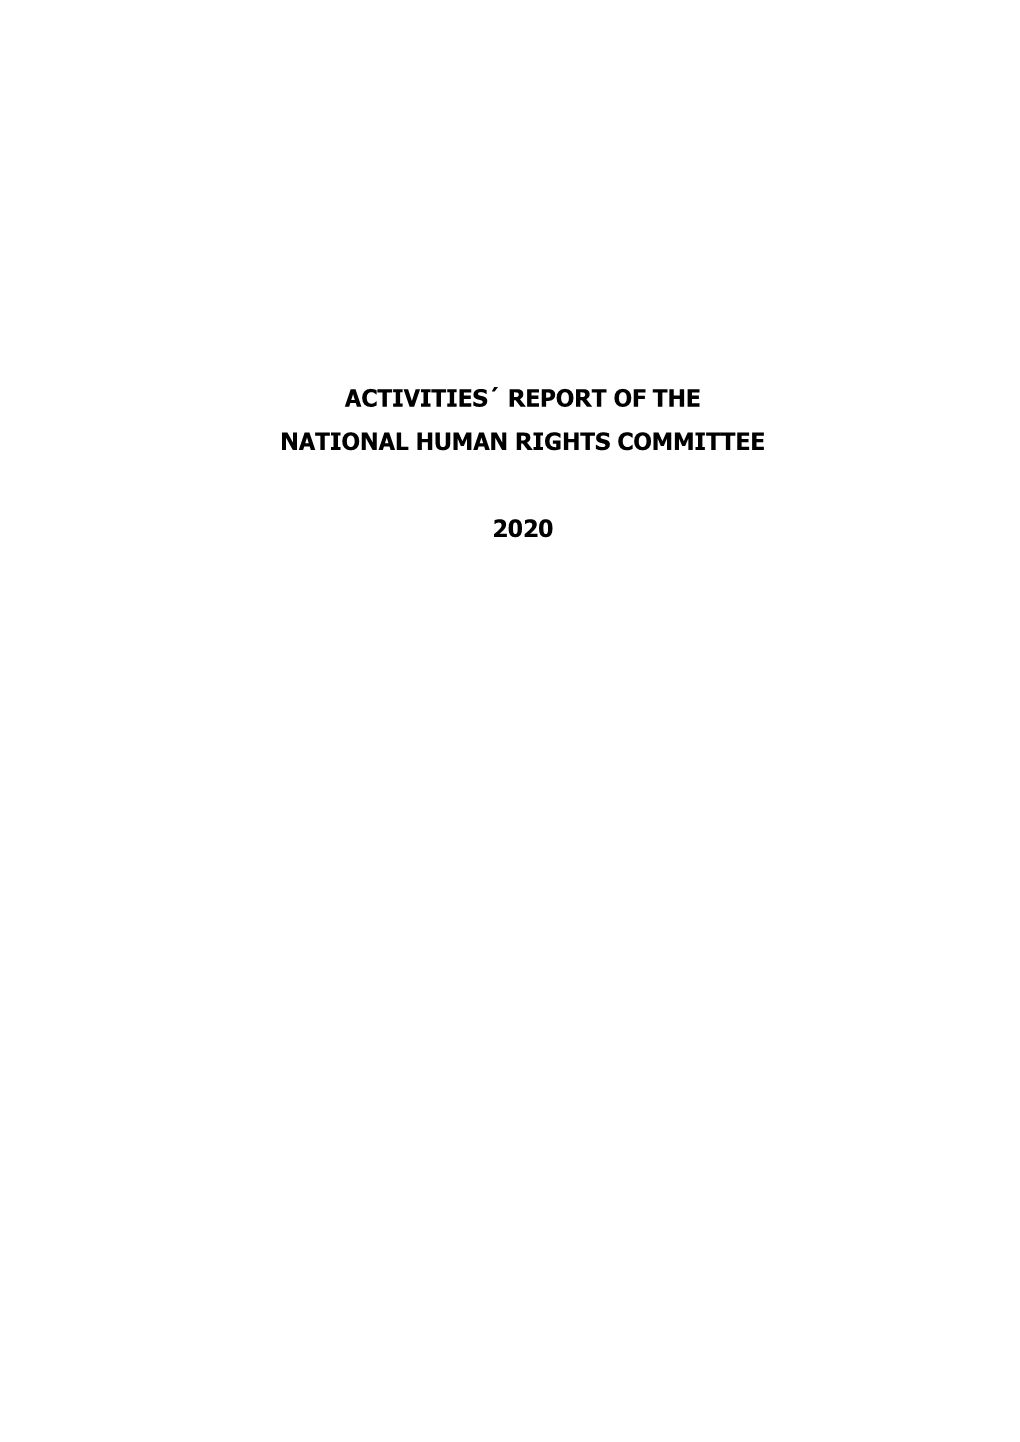 PNHRC's Report for 2020